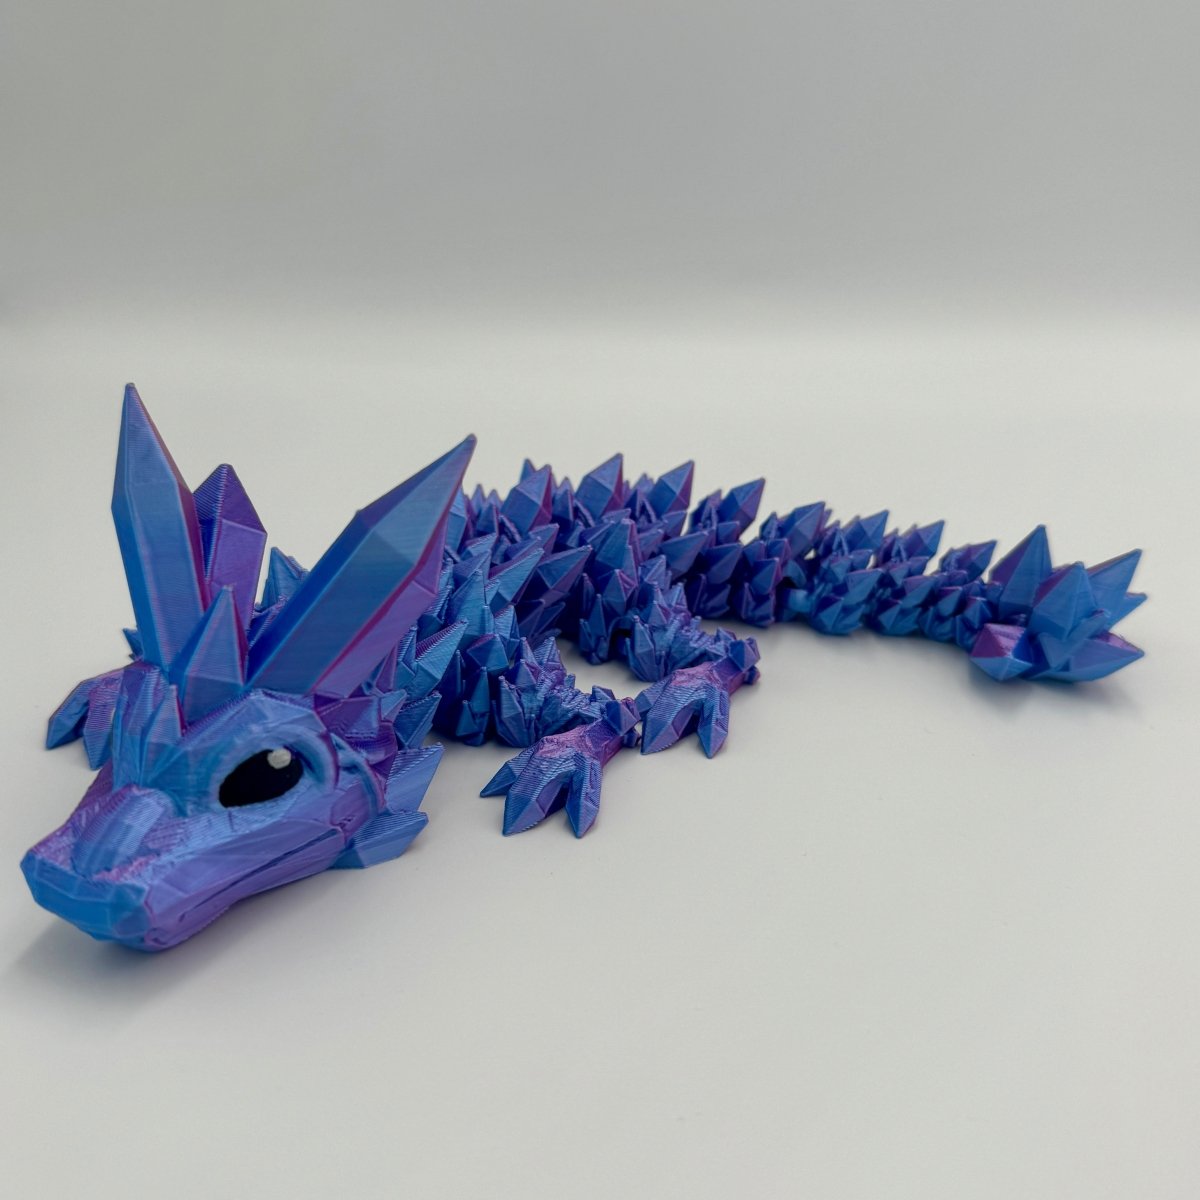 Baby Crystal Dragon 12" Articulated Dragon - Cosmic Chameleon